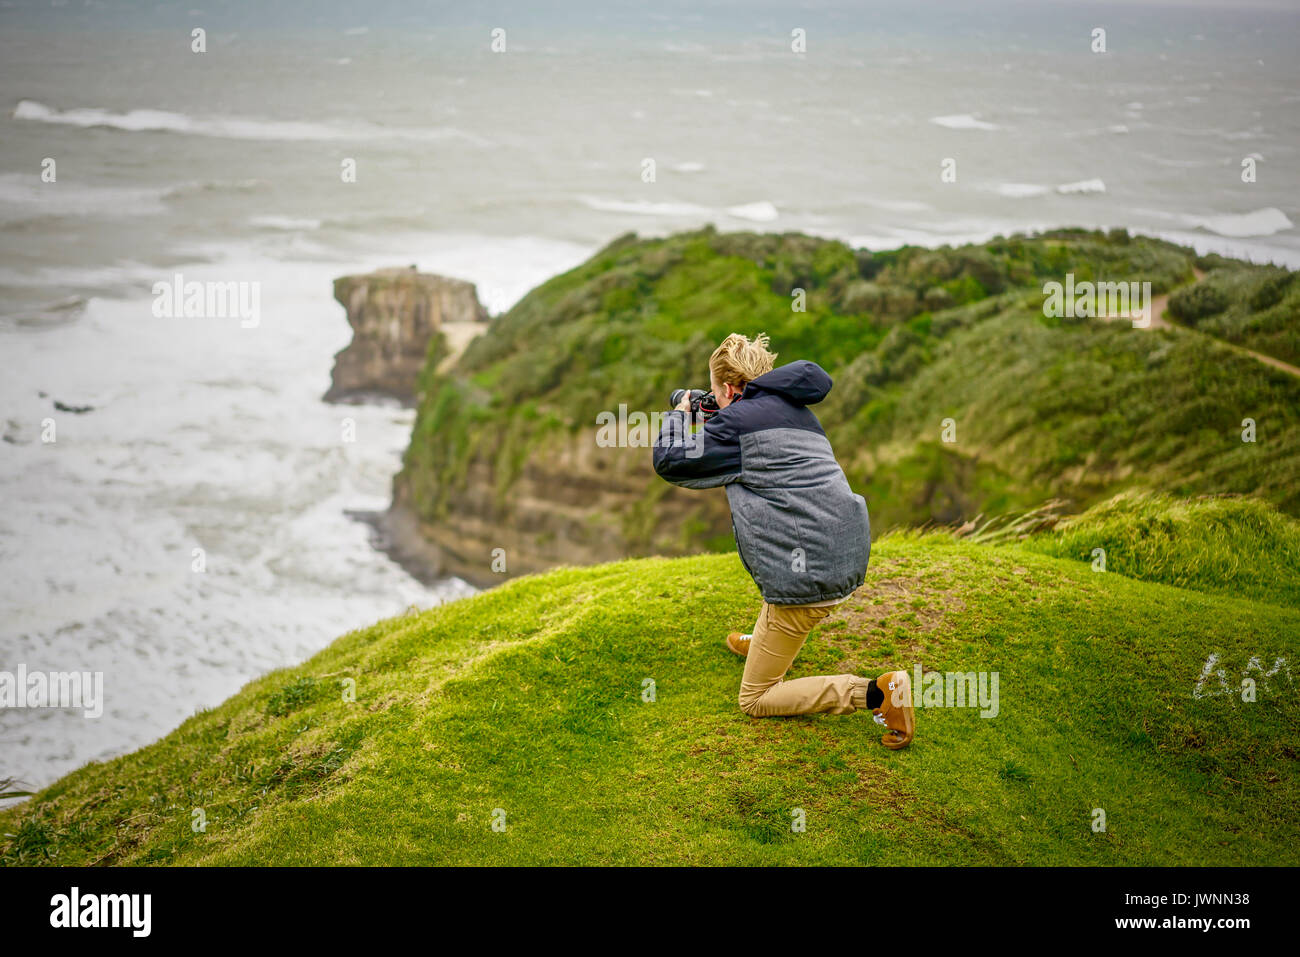 Photographer In Action At The Edge Of Cliff At Muriwai Beach, Auckland, New Zealand Stock Photo